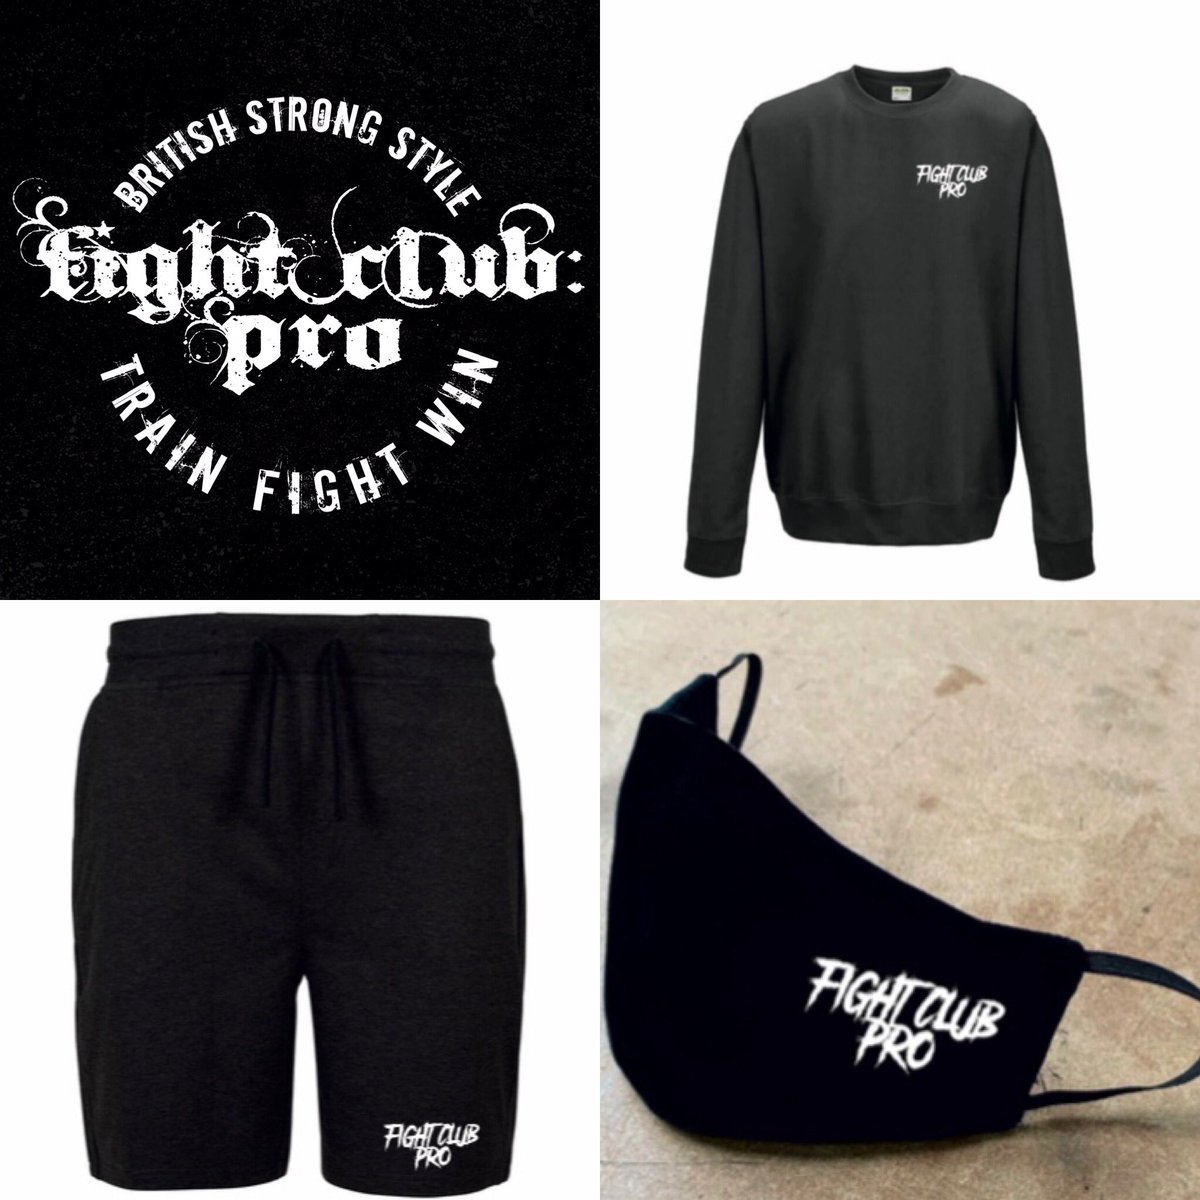 ICYMI: LOCKDOWN LOUNGE WEAR • Embroidered Sweatshirt • Embroidered Shorts • Non-surgical Face Mask Available now at: fightclubpro.bigcartel.com * Face Mask free with orders £45+ * Tracked International shipping available upon request Stay safe. 🙏🏽 TRAIN - FIGHT - WIN